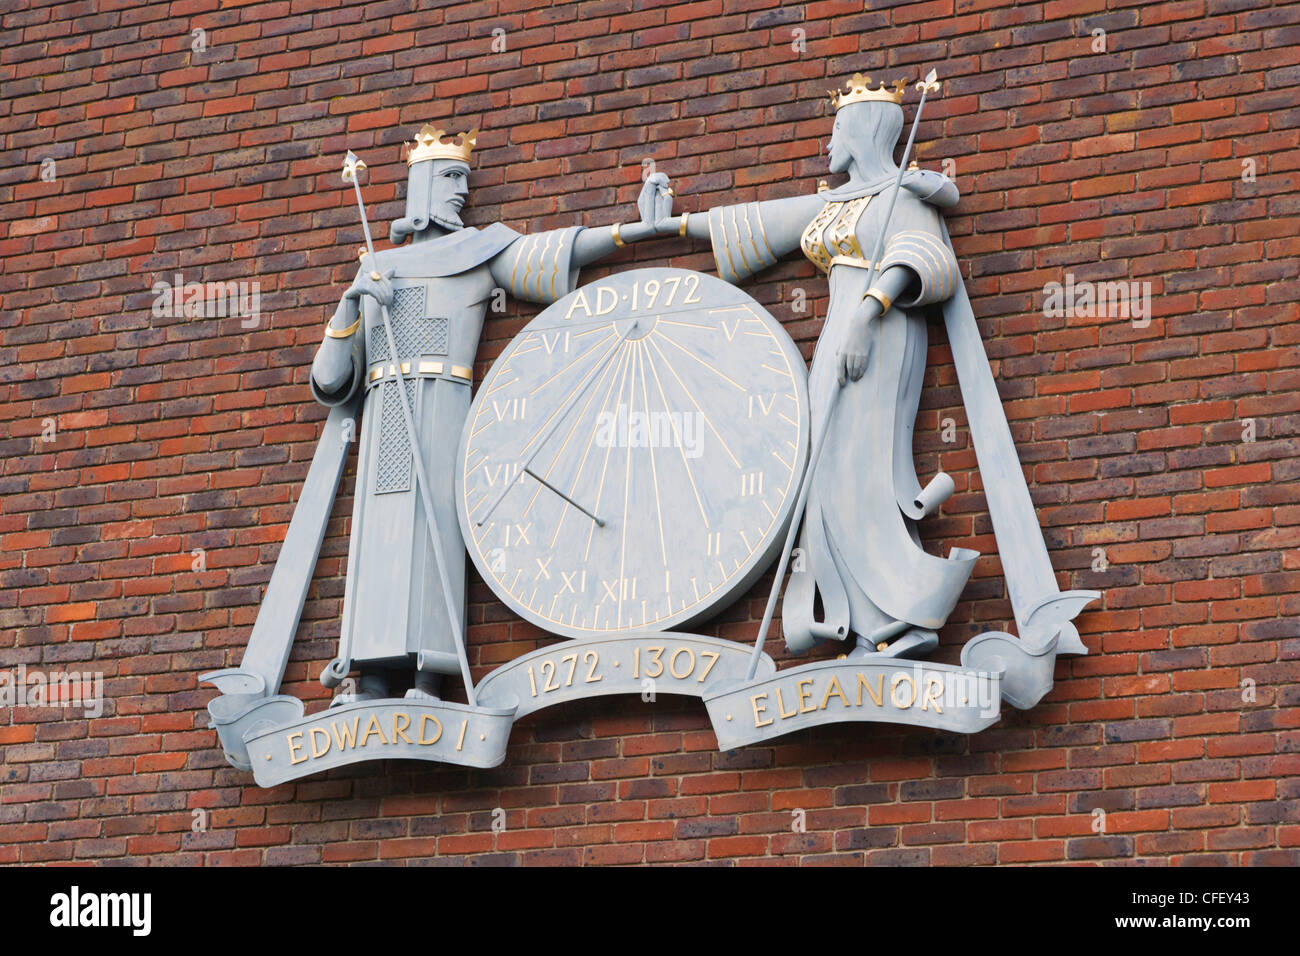 Edward I and Queen Eleanor Sundial on the wall of Tunsgate Square by the late Ann Garland, Castle Street, Guildford, England, UK Stock Photo